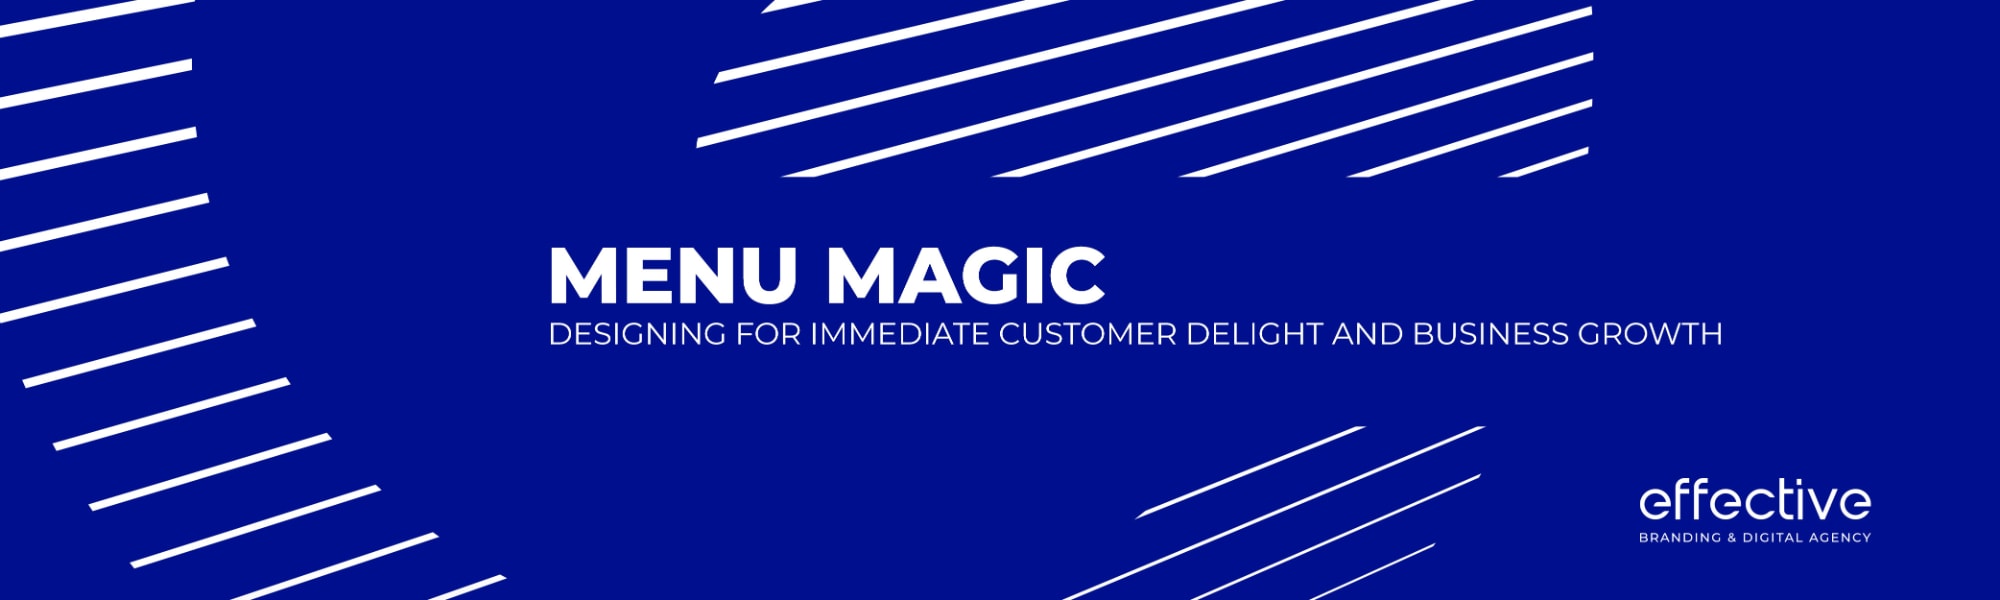 Menu Magic Designing for Immediate Customer Delight and Business Growth